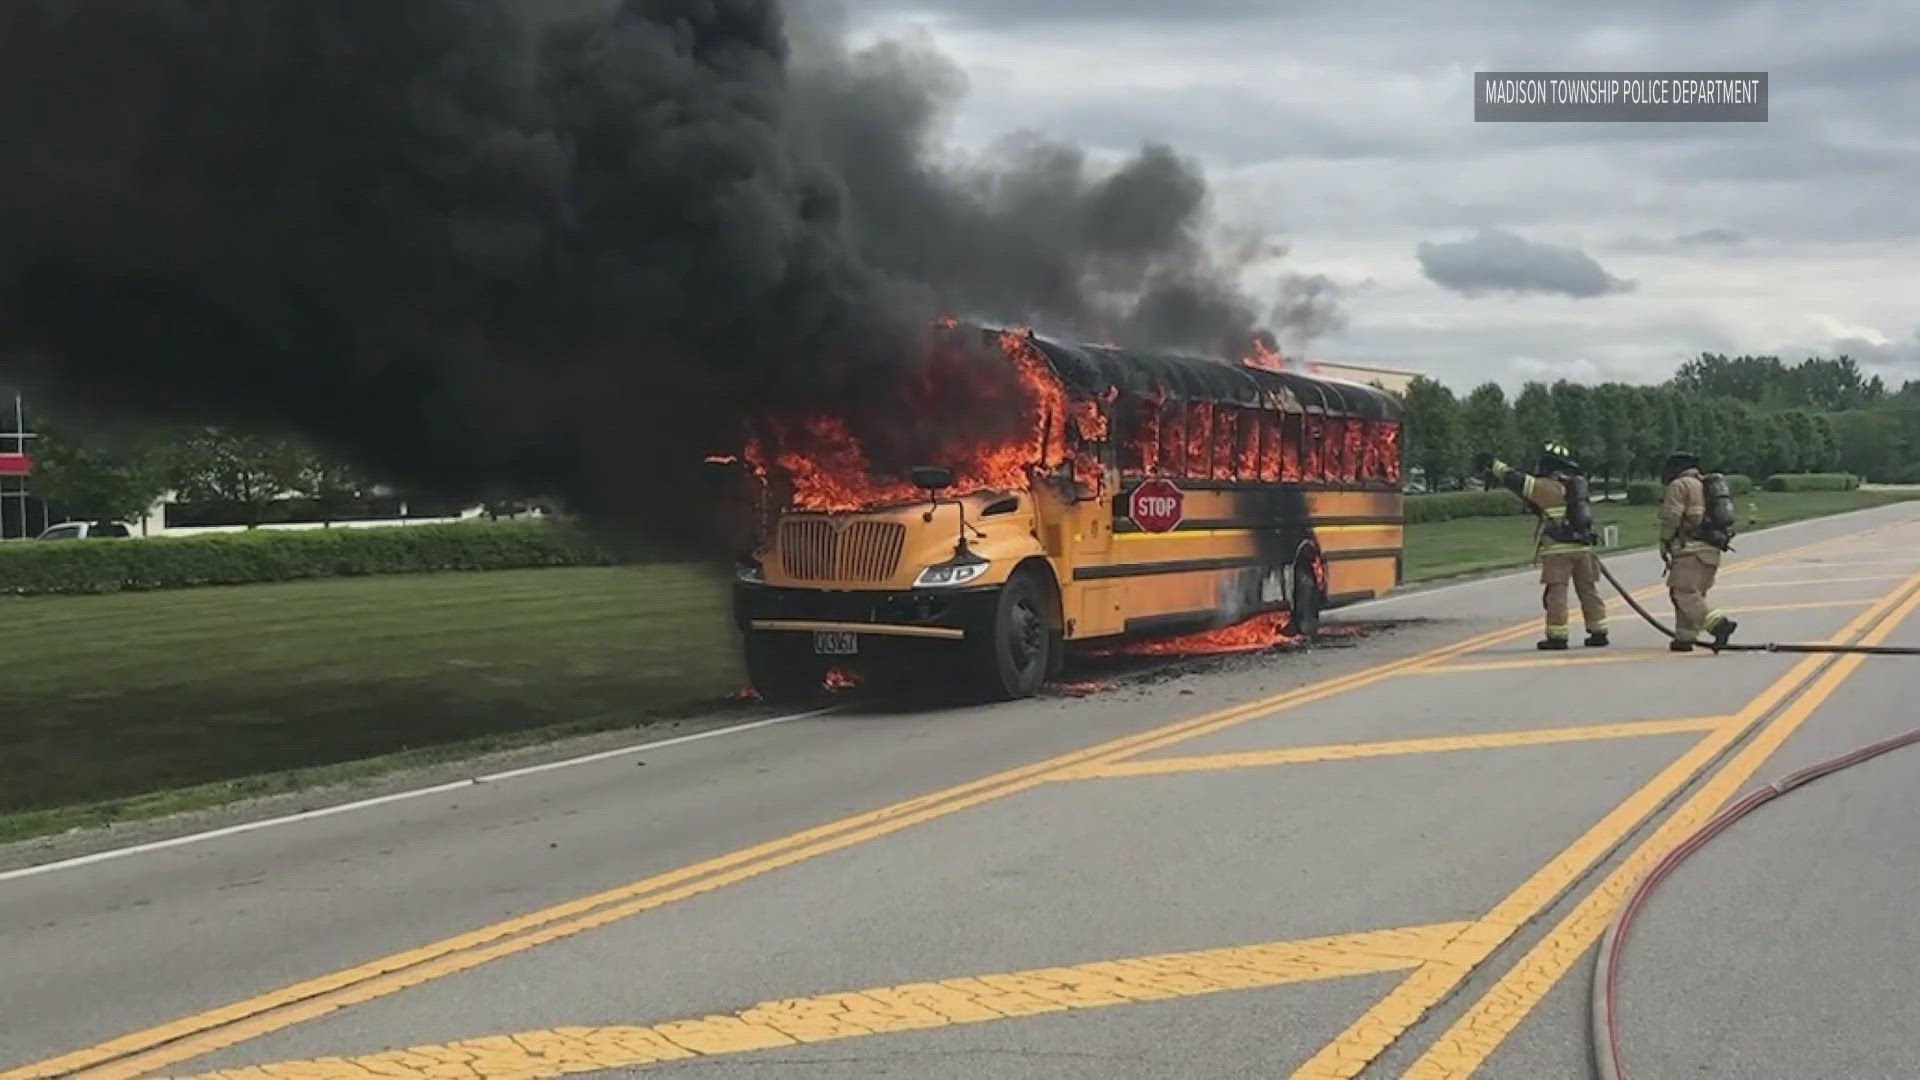 Dashcam video from an officer’s cruiser shows dark, thick smoke engulfing the bus and firefighters working to put it out.